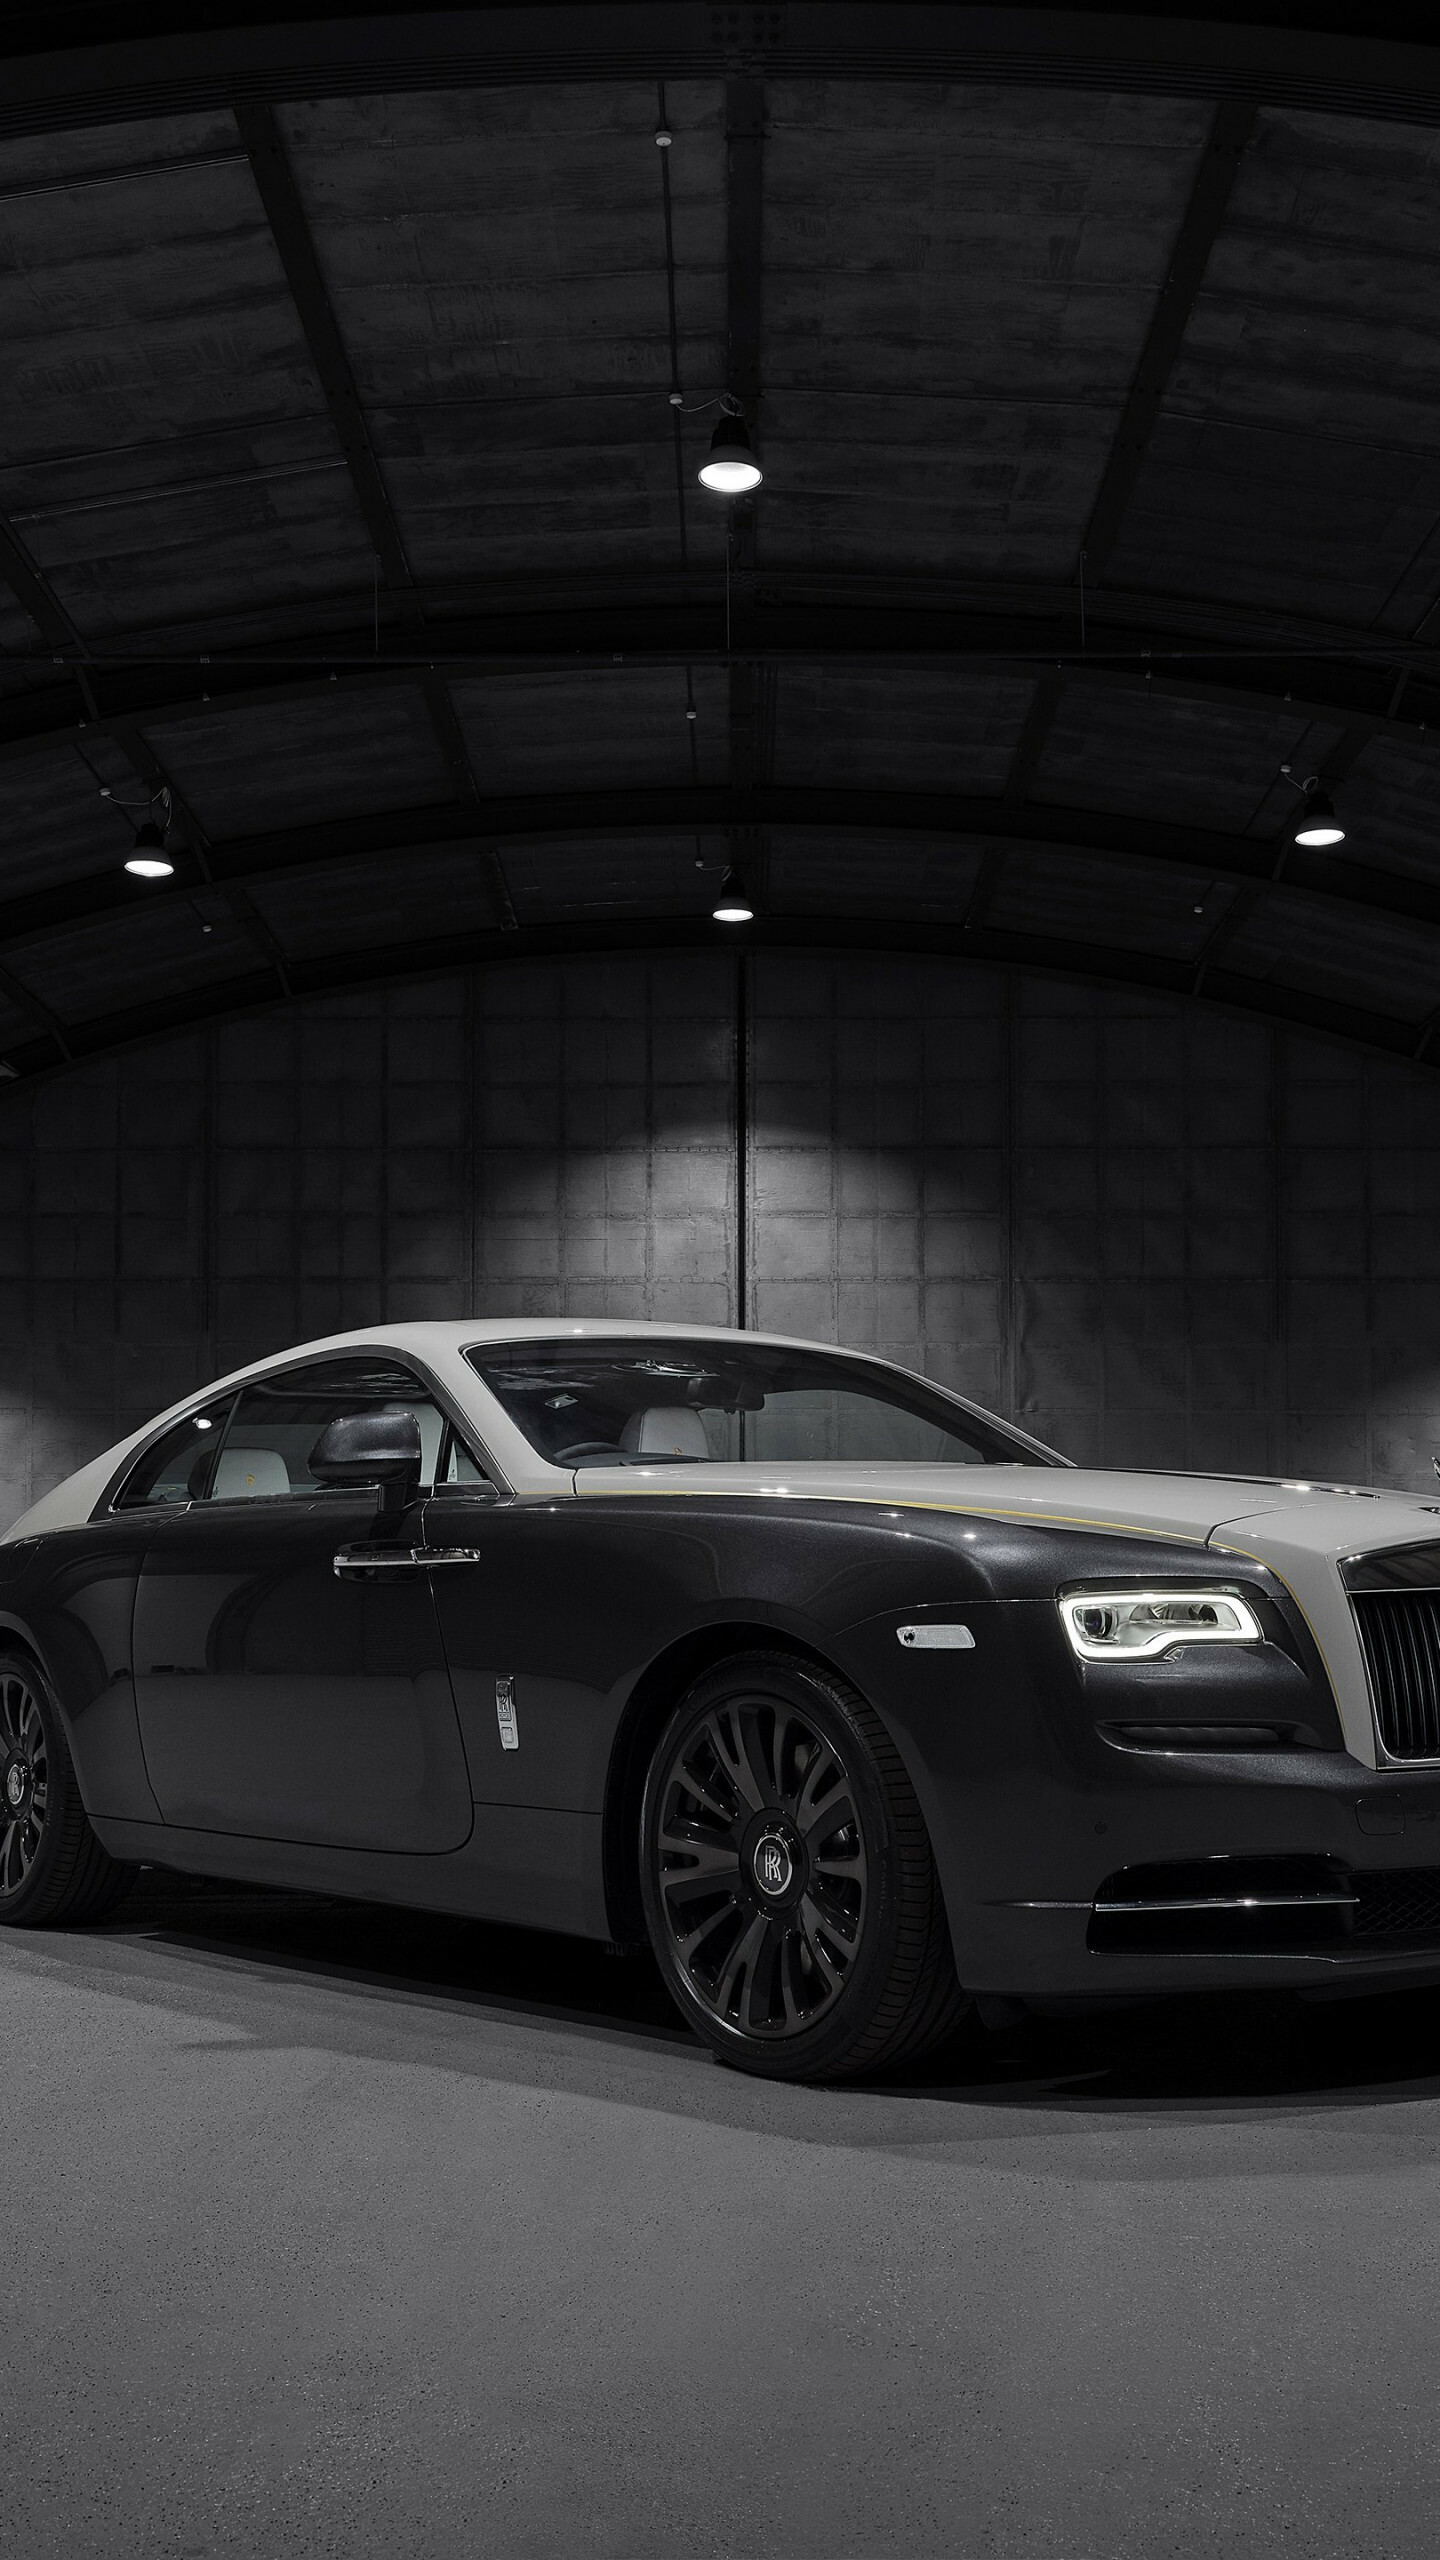 Rolls-Royce: Model Wraith, The original company had been nationalized in 1971. 1440x2560 HD Background.